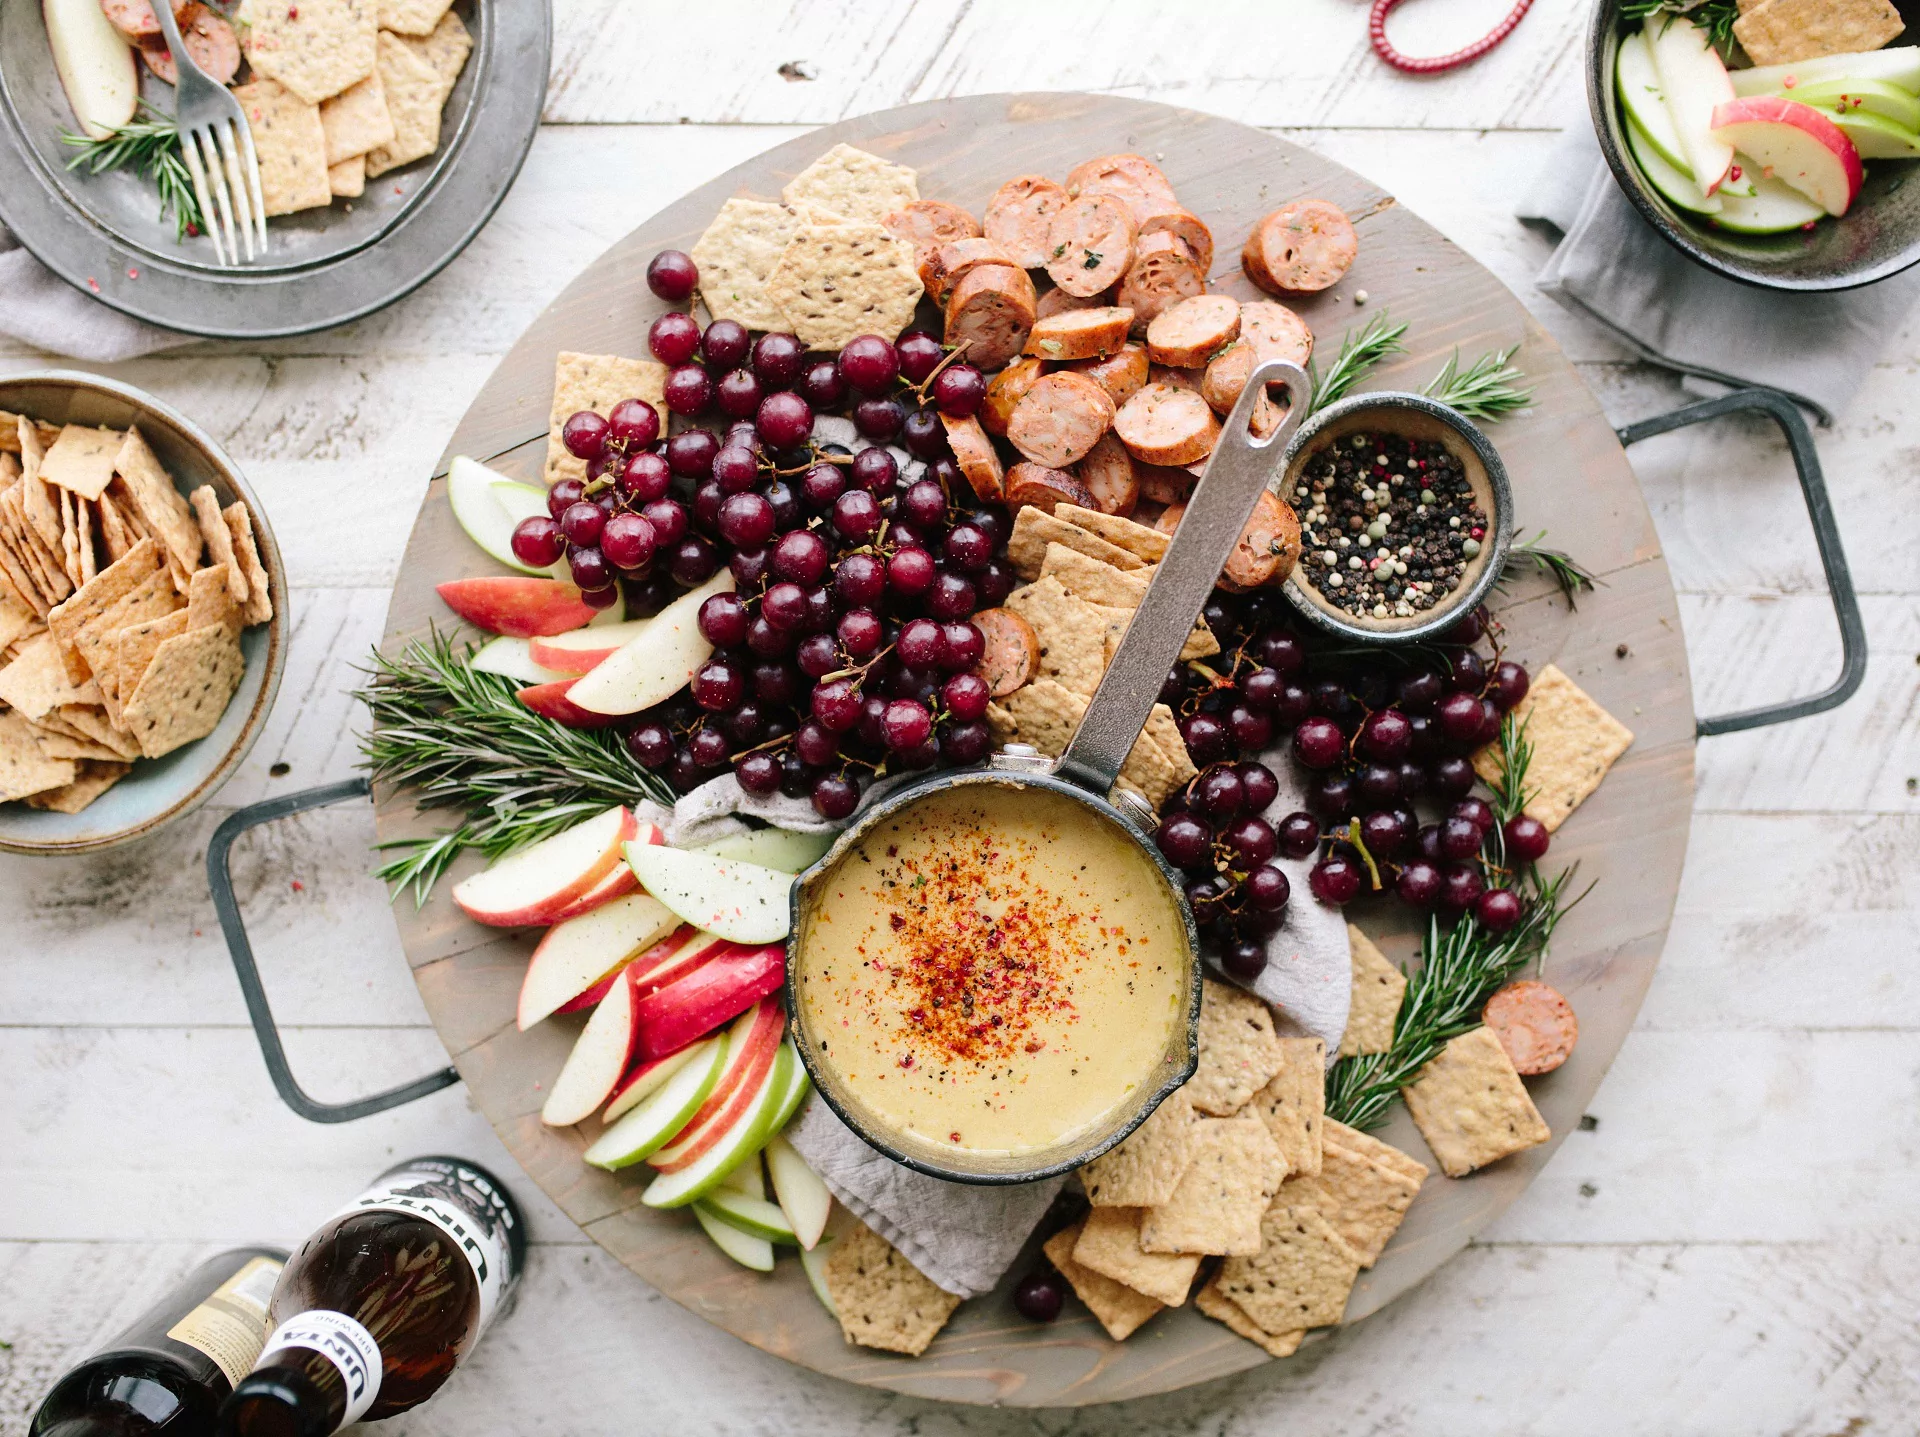 The Ultimate Appetizer Platter with Mediterranean Flavors